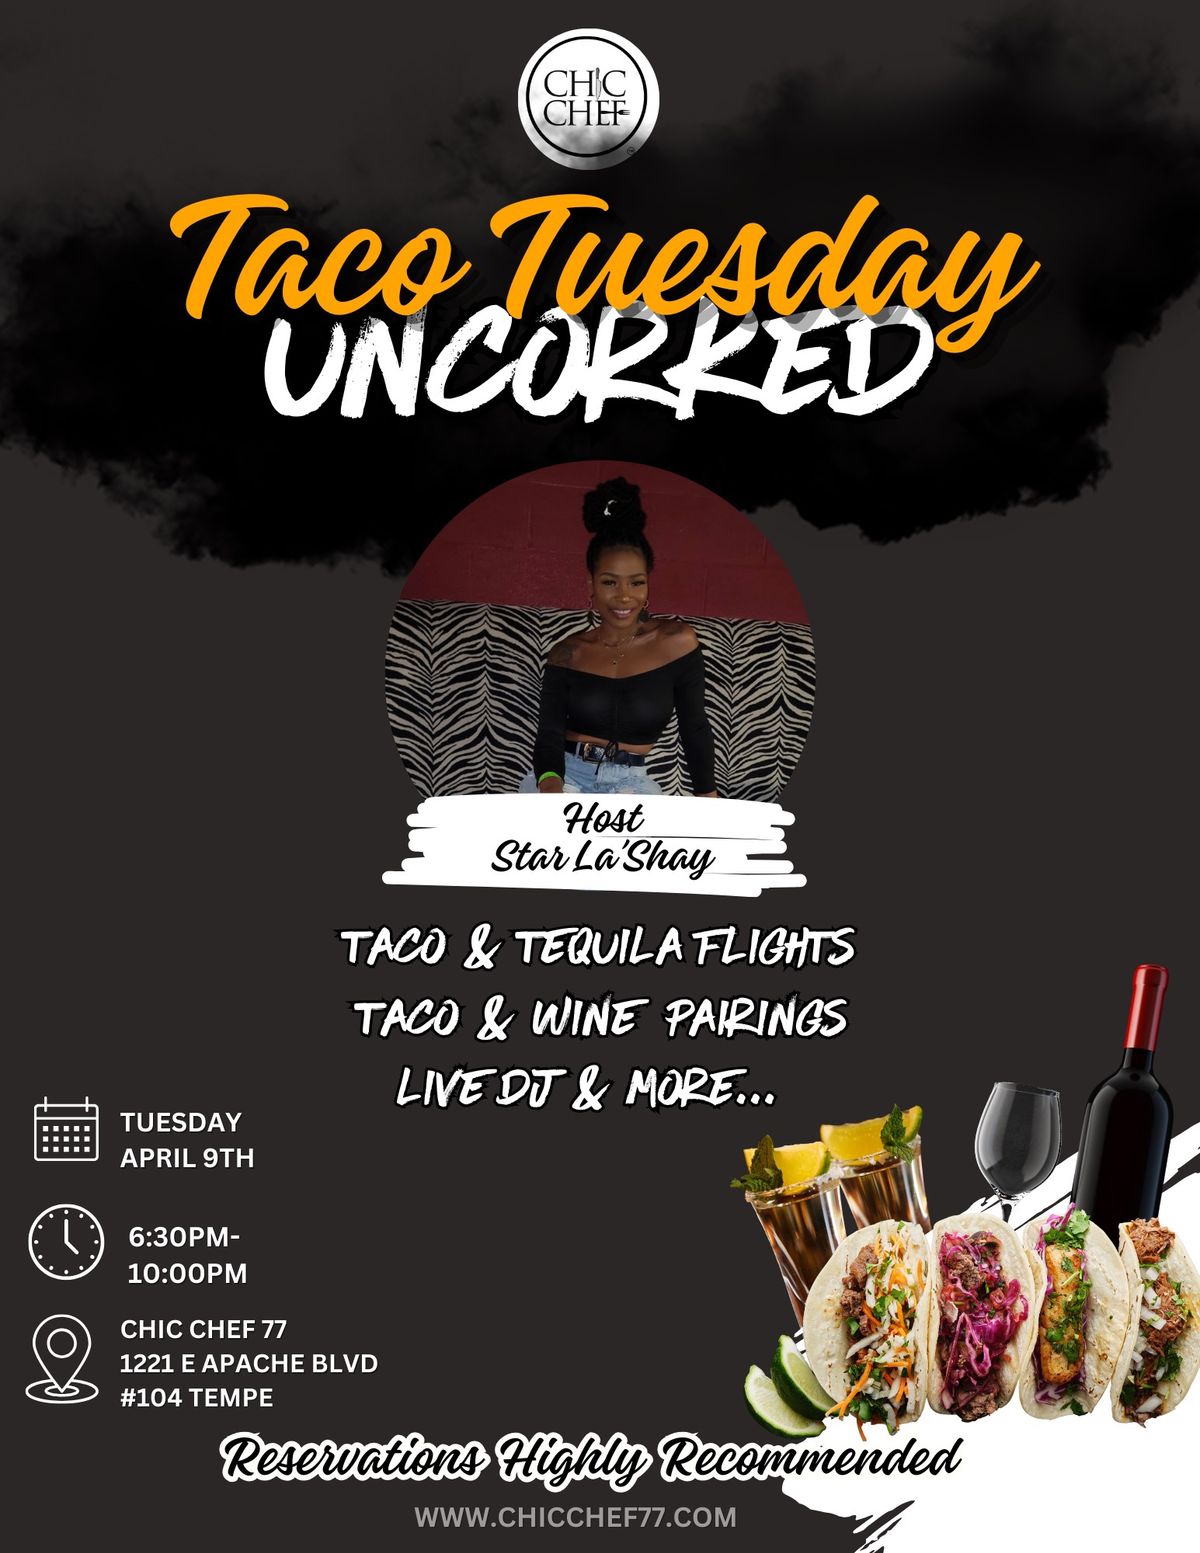 Taco Tuesday UNCORKED!